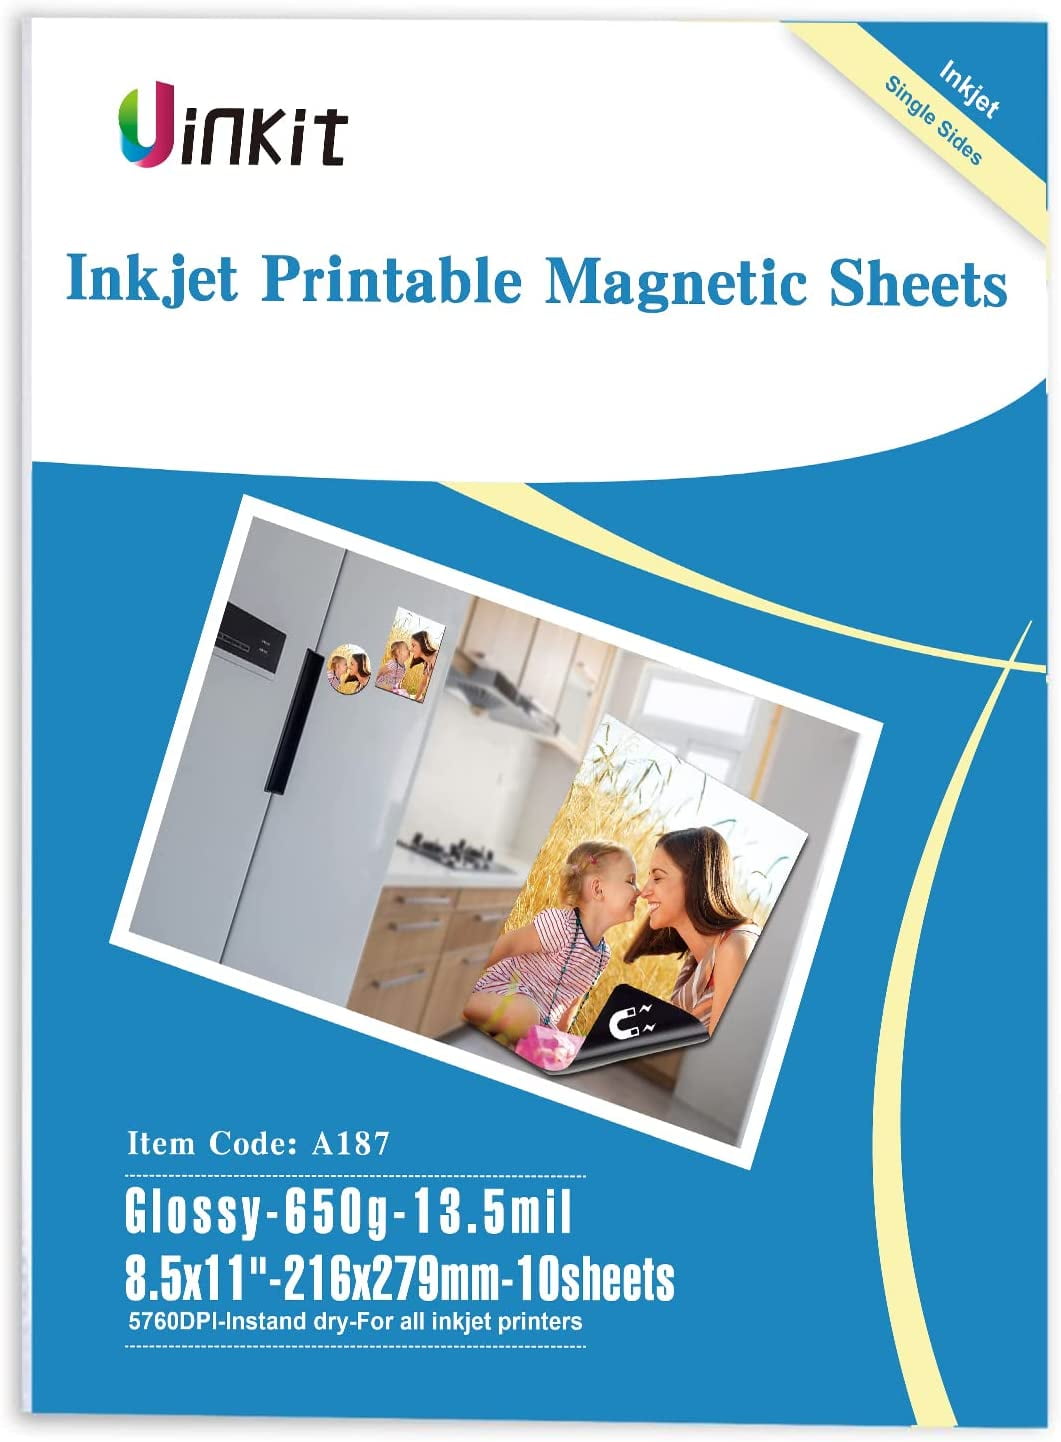  AVERY Printable Magnet Sheets, 8.5 x 11, Inkjet Printer,  Pack of 60 Matte White Sheets (3270) : Office Products